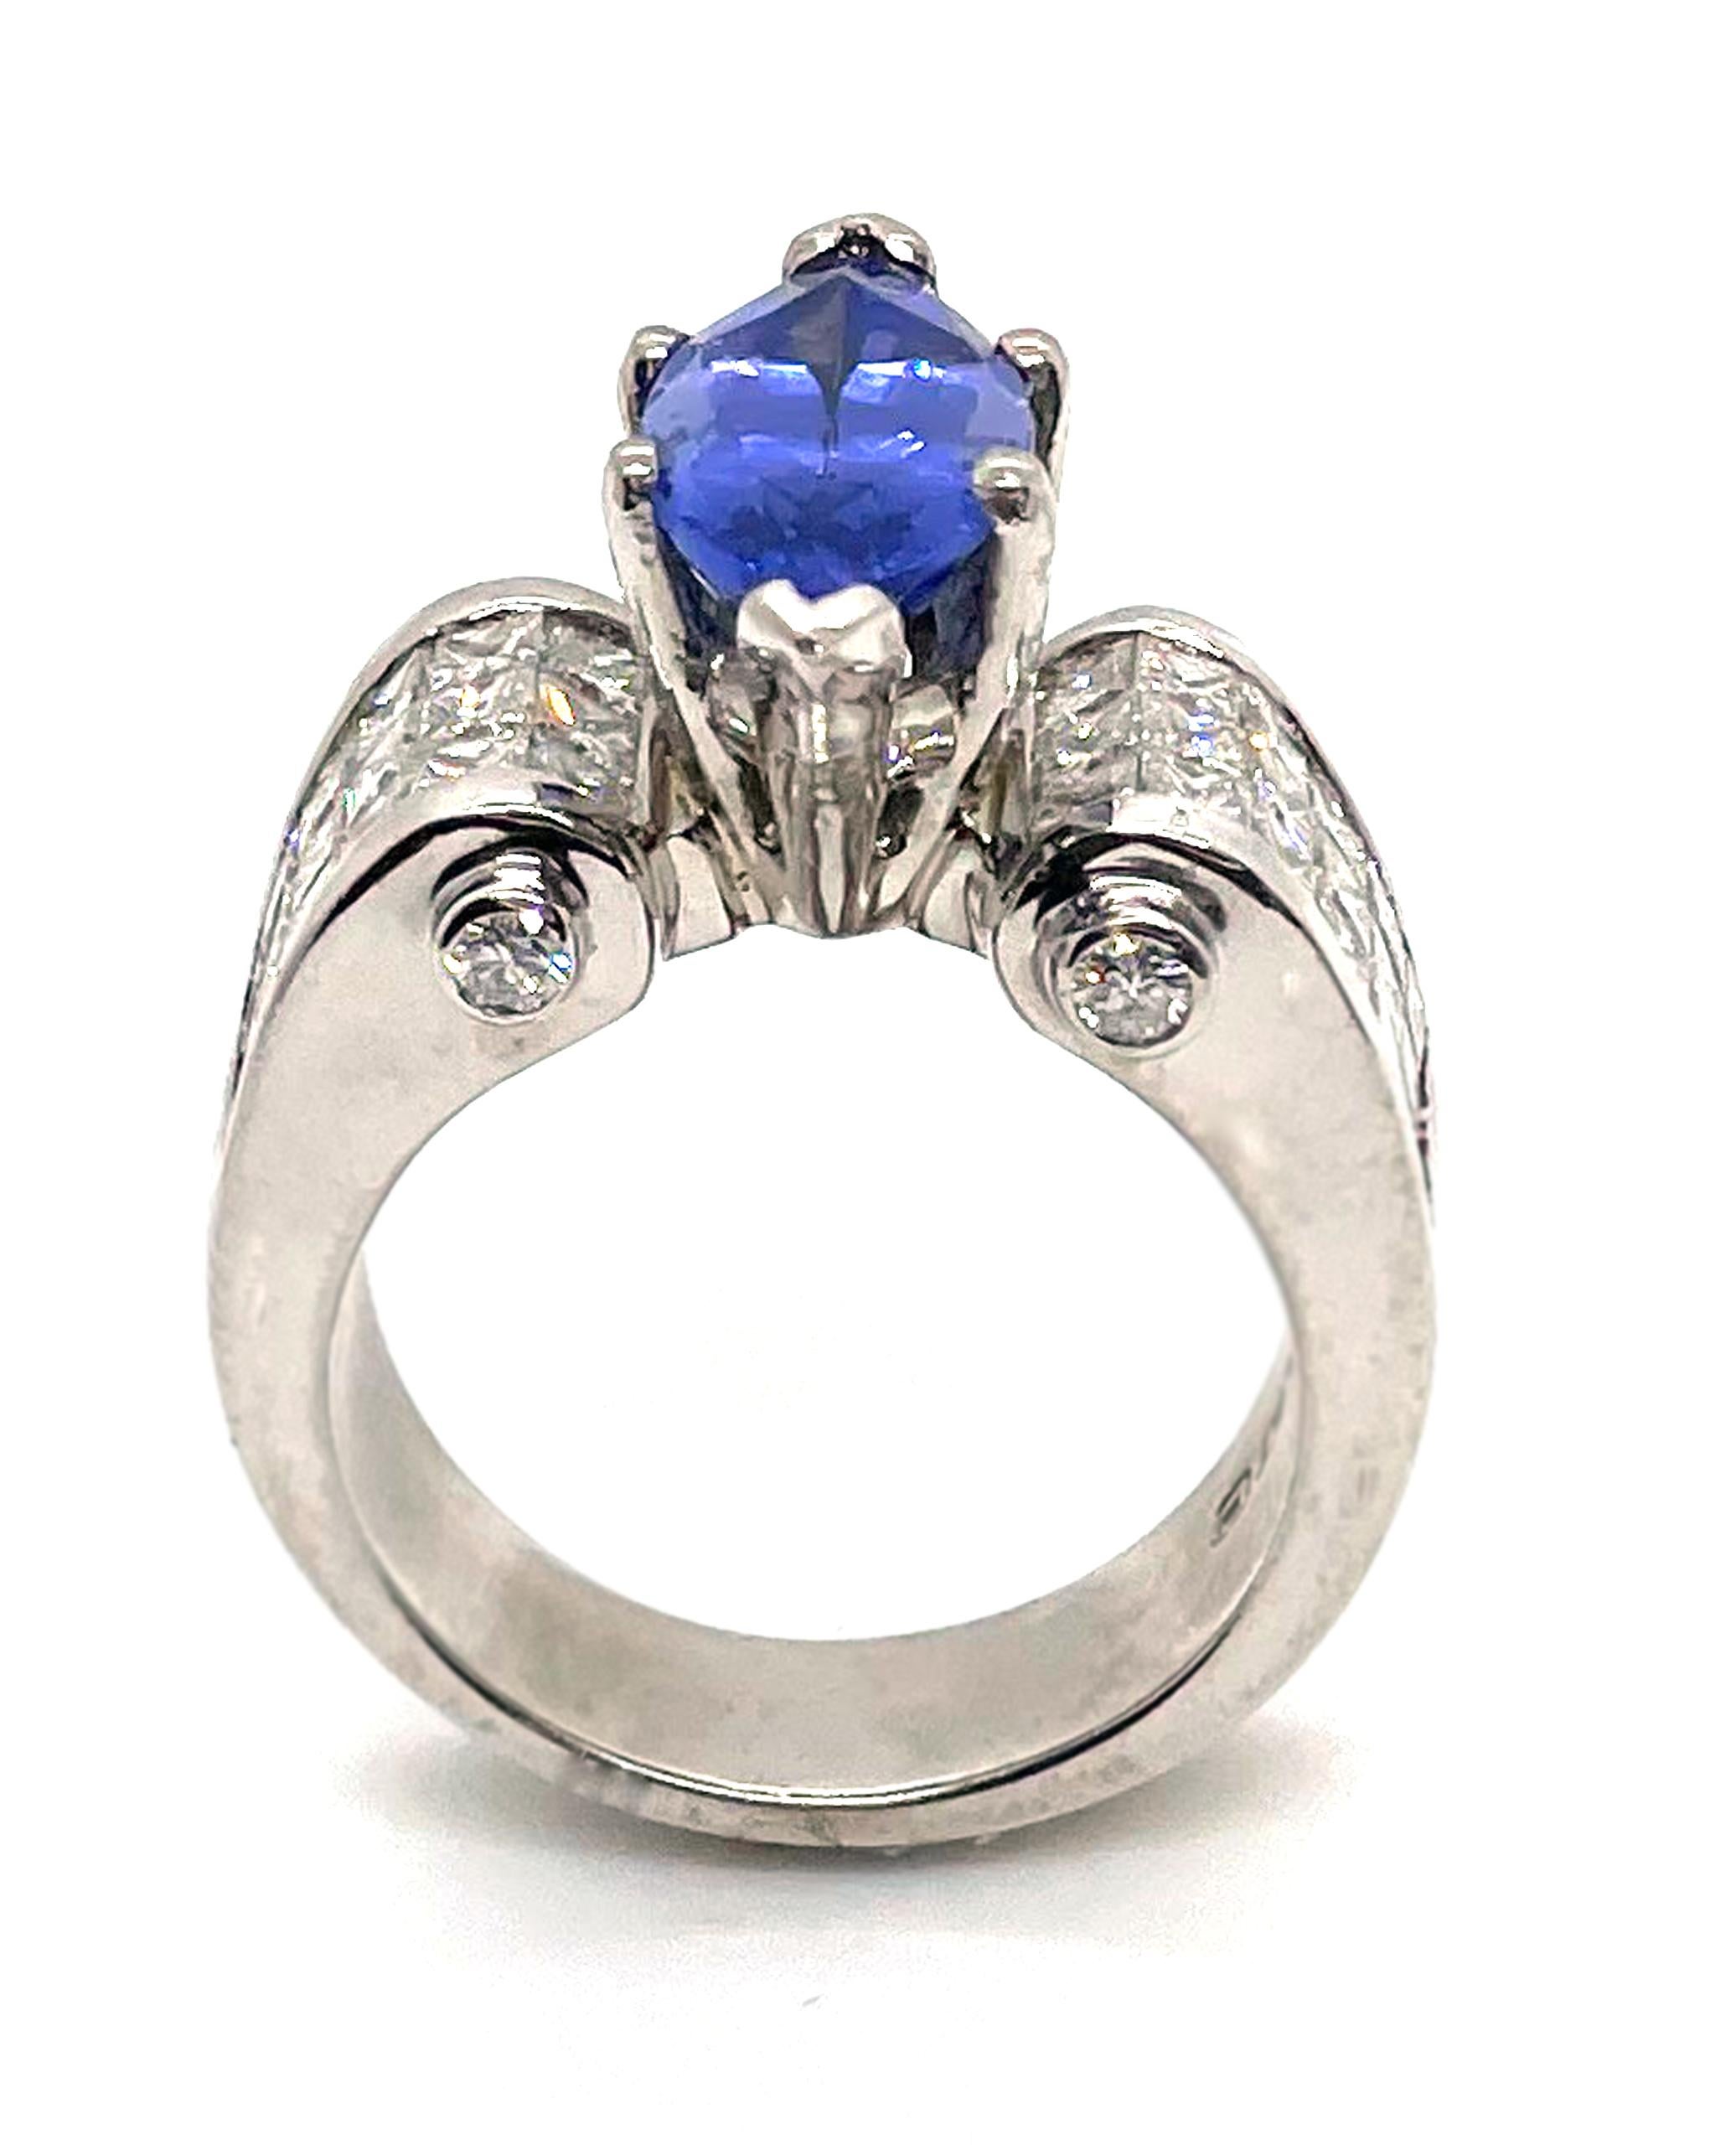 Platinum ring with 36 invisibly set princess-cut diamonds and 4 round brilliant-cut diamonds totaling 2.42 carats (G color, VVS clarity). One center marquise shape tanzanite totaling 3.02 carats.

* Circa 1990
* Finger size 6.75